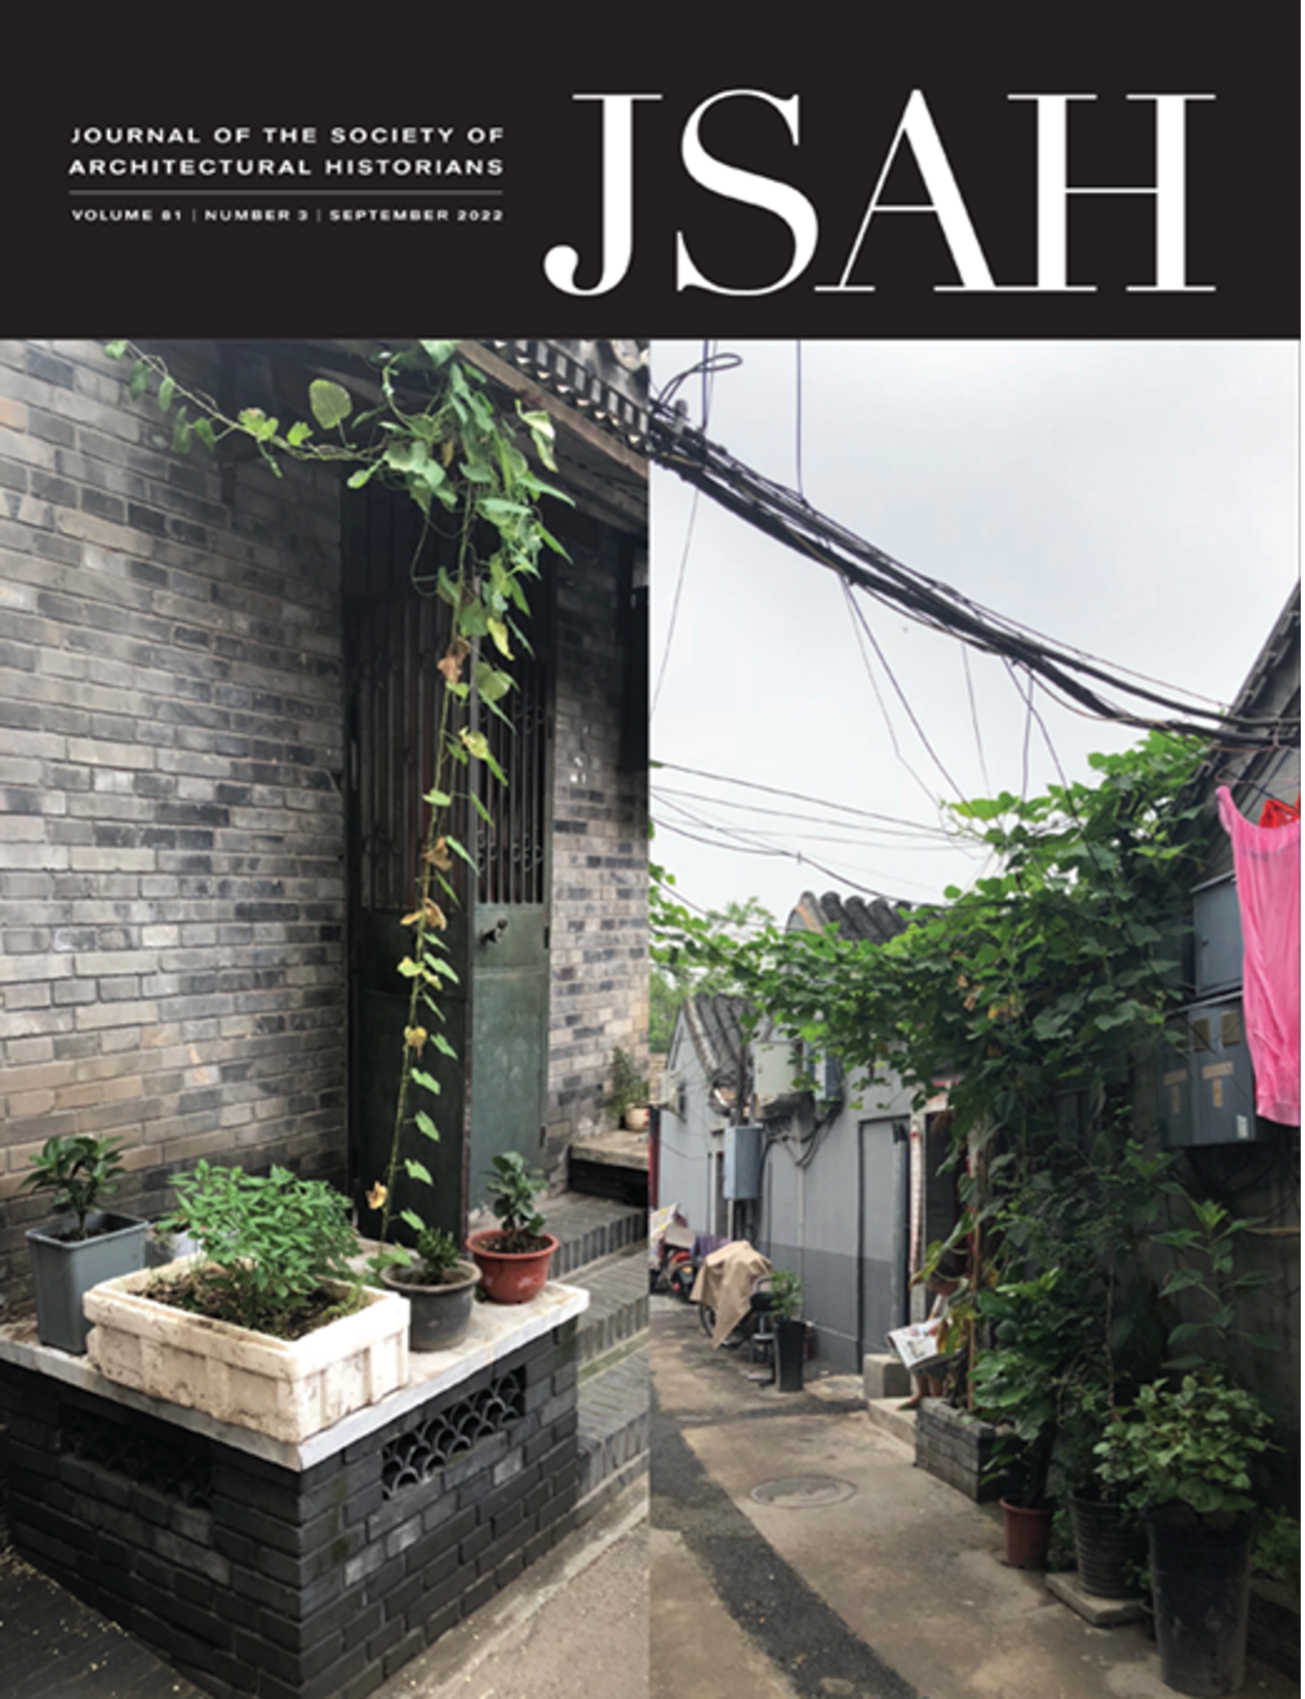 Cover for Journal of the Society of Architectural Historians (JSAH) Volume 81 | Number 3 | September 2022, written in white text on a black background at the top of the cover. Below is a color photograph of an alley with plants growing in pots and on sides of buildings and power lines crisscrossing the alley.